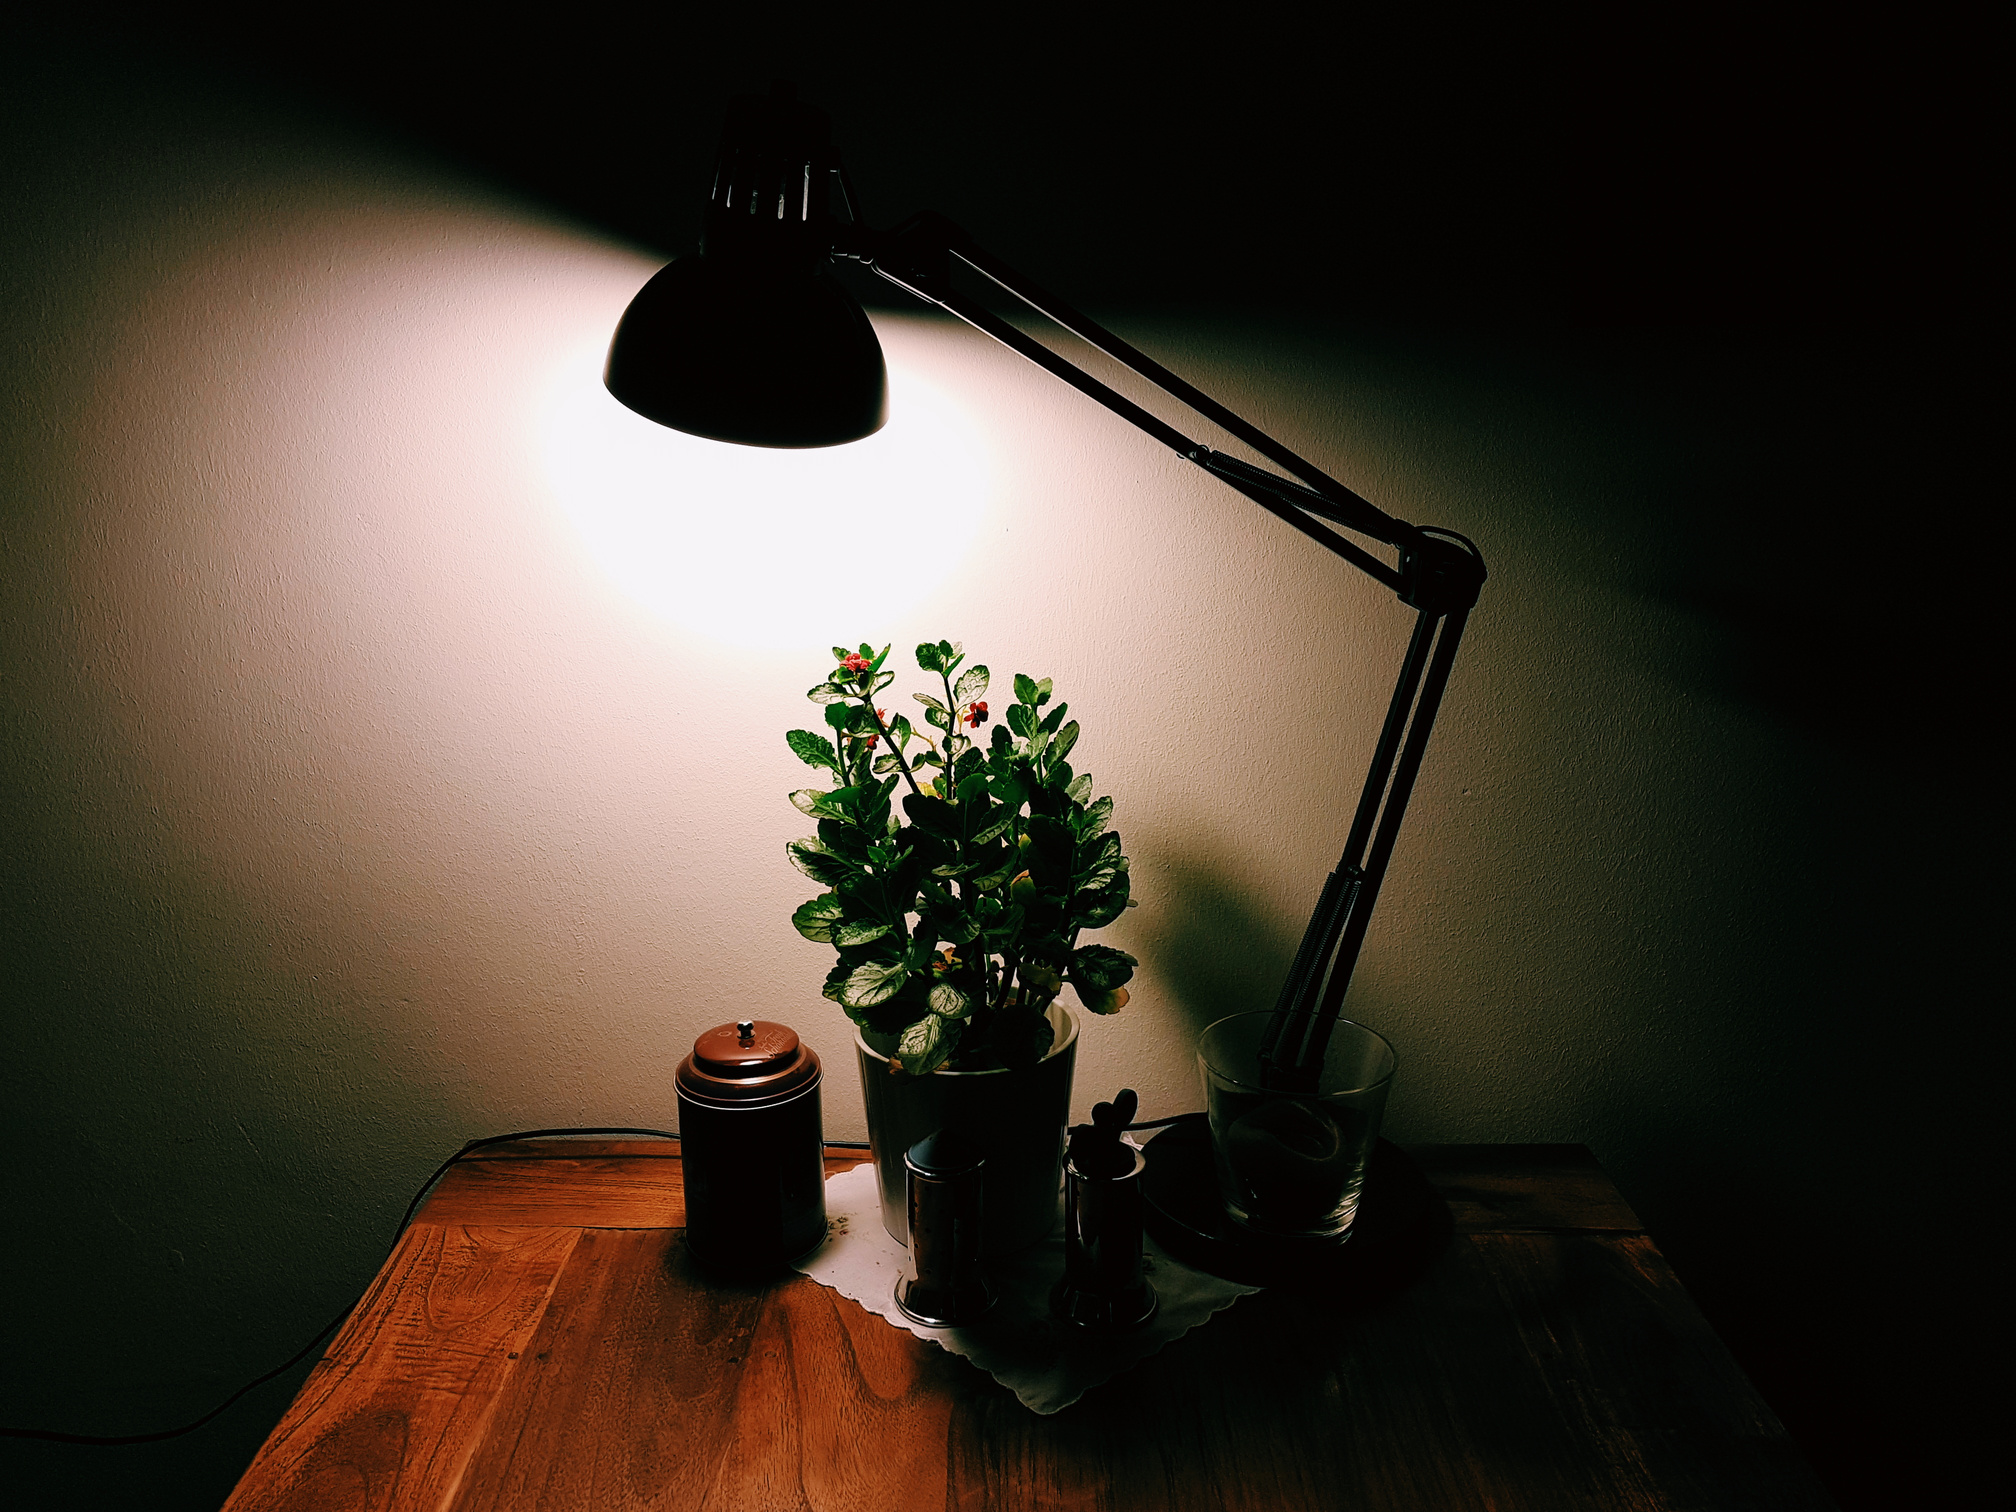 Turned-on Desk Lamp over Potted Plant